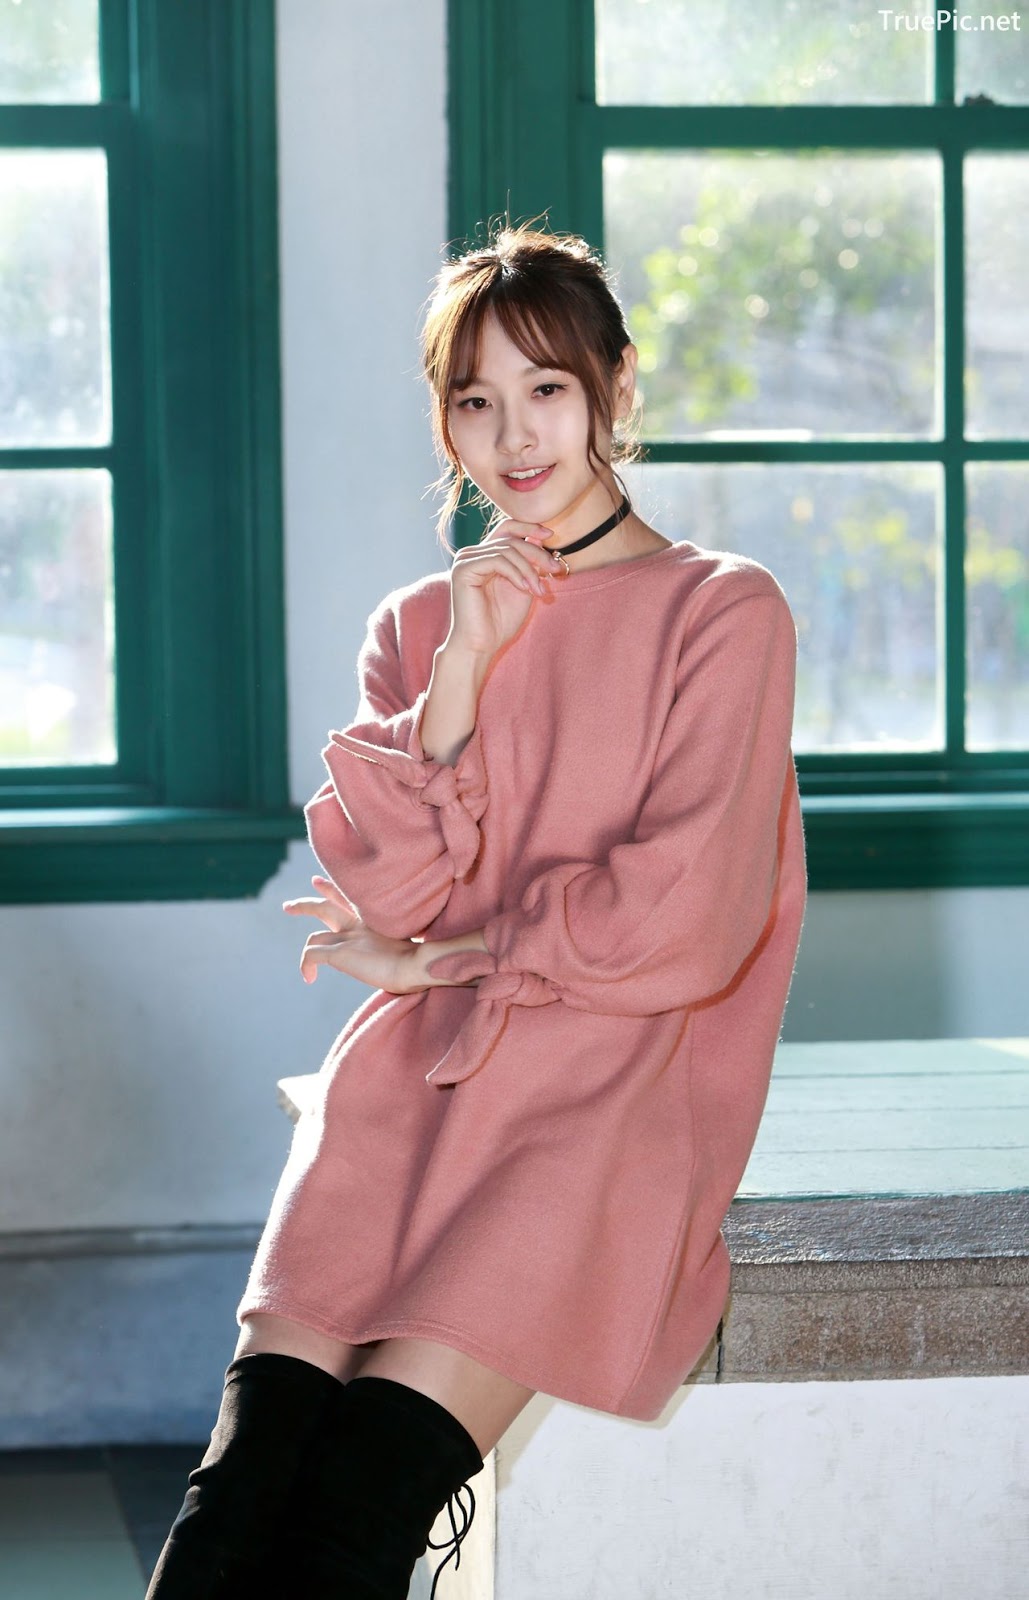 Image-Taiwanese-Model-郭思敏-Pure-And-Gorgeous-Girl-In-Pink-Sweater-Dress-TruePic.net- Picture-12